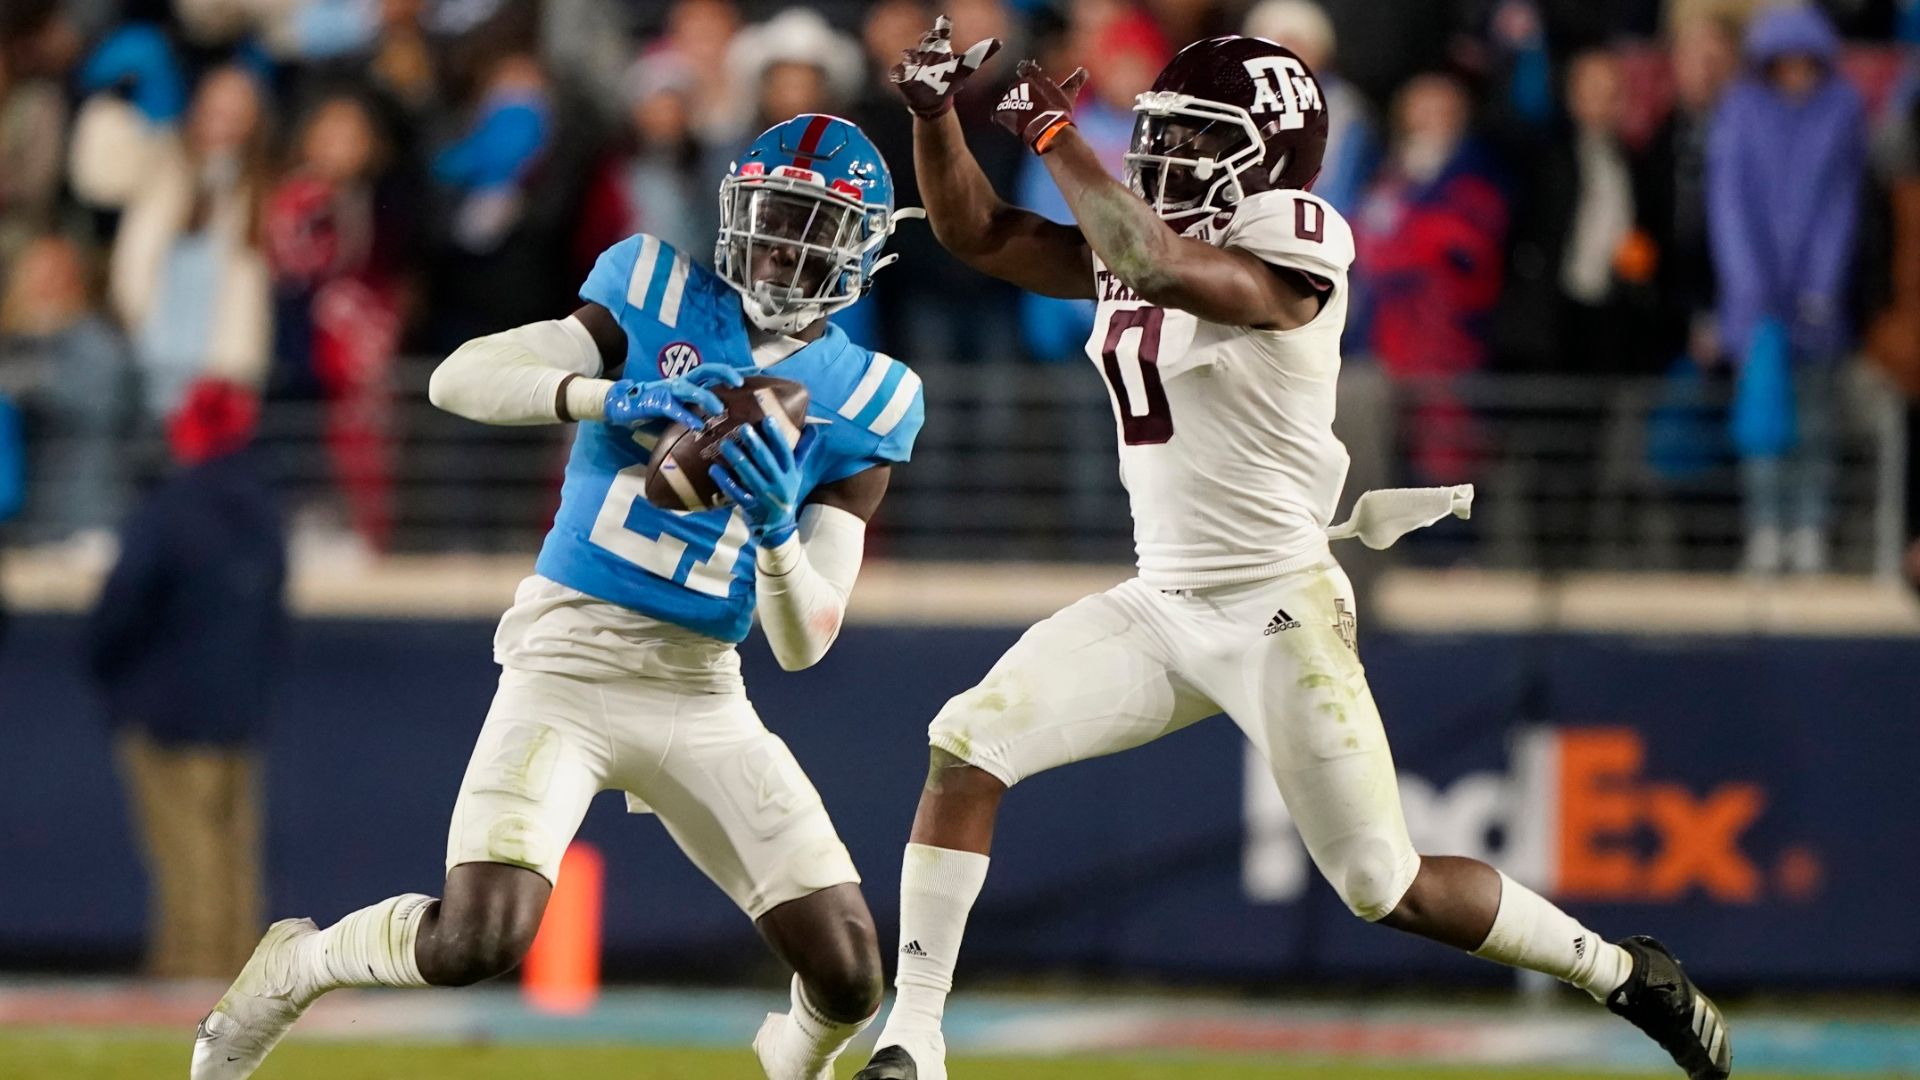 Tell me I'm wrong: Rebels, Aggies could surprise